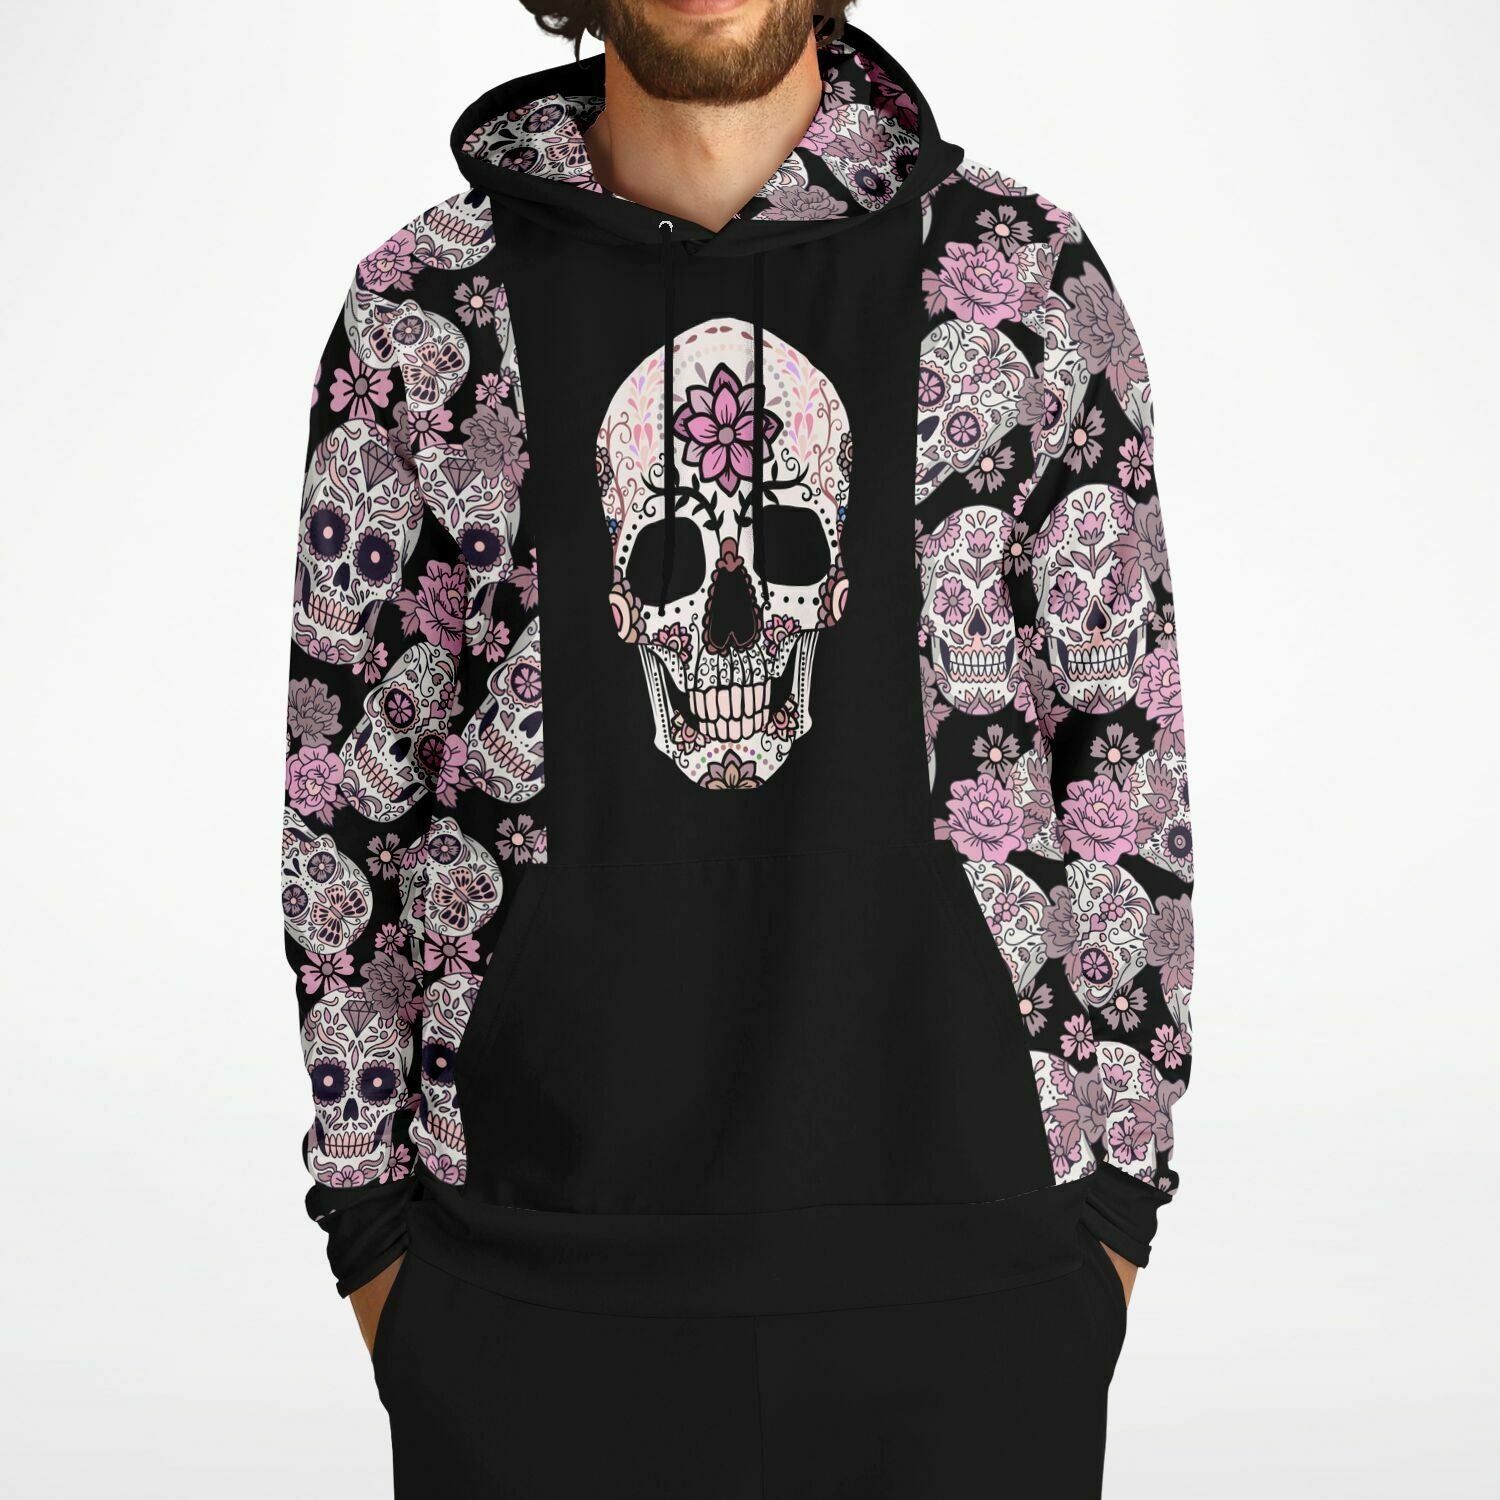 Black & Pink Day of the Dead Fashion Hoodie